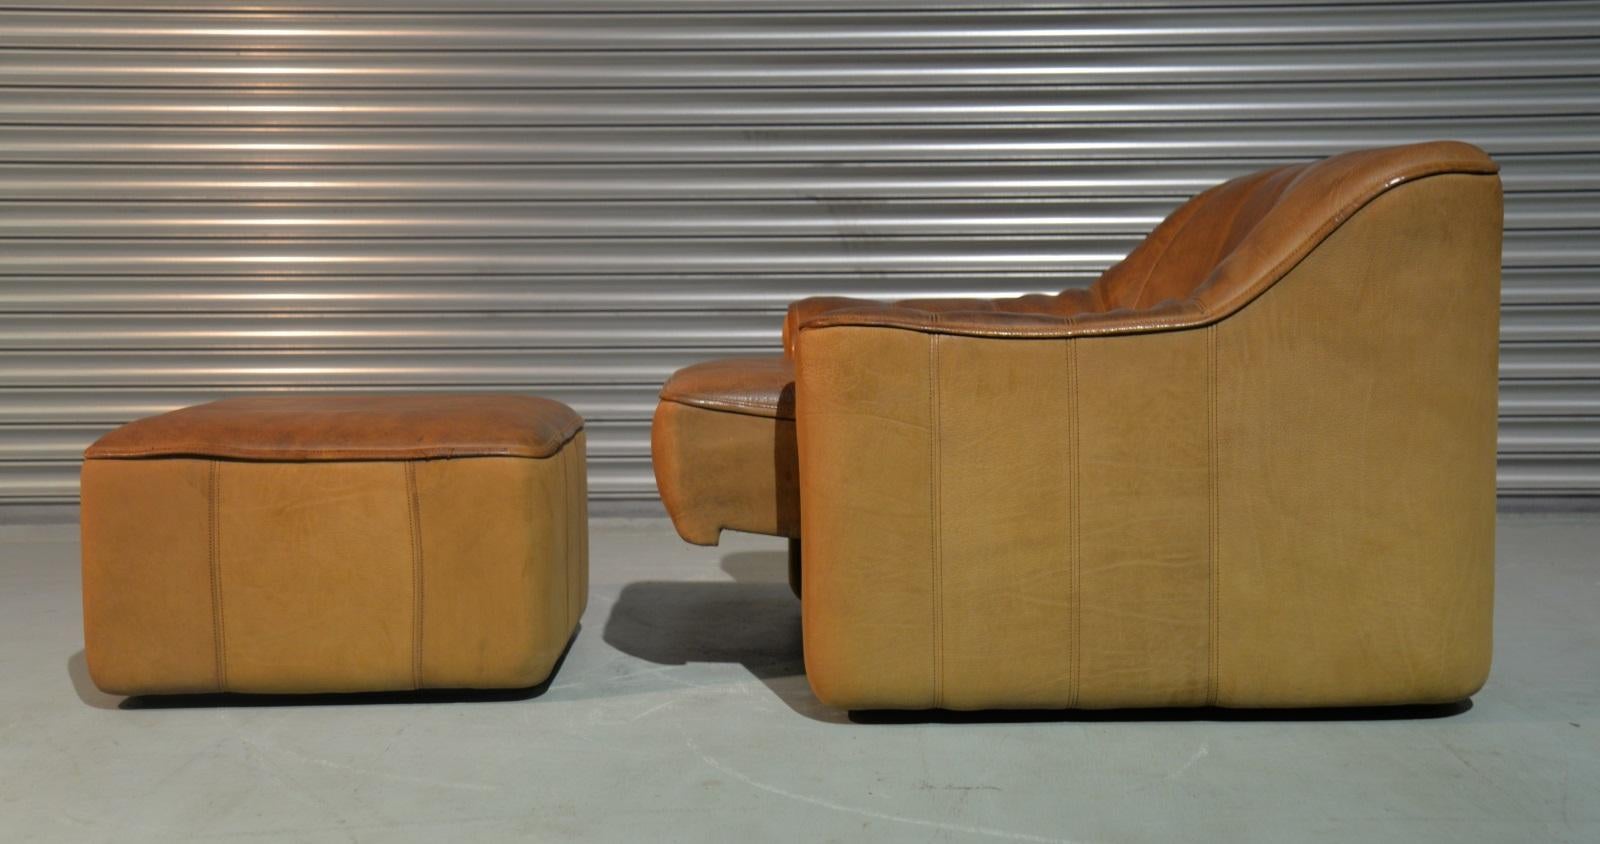 Discounted airfreight for our International customers ( from 2 weeks door to door )

We are delighted to bring to you a vintage 1970s De Sede DS 44 armchair and matching ottoman in thick buffalo leather with a soft silky texture similar to suede.